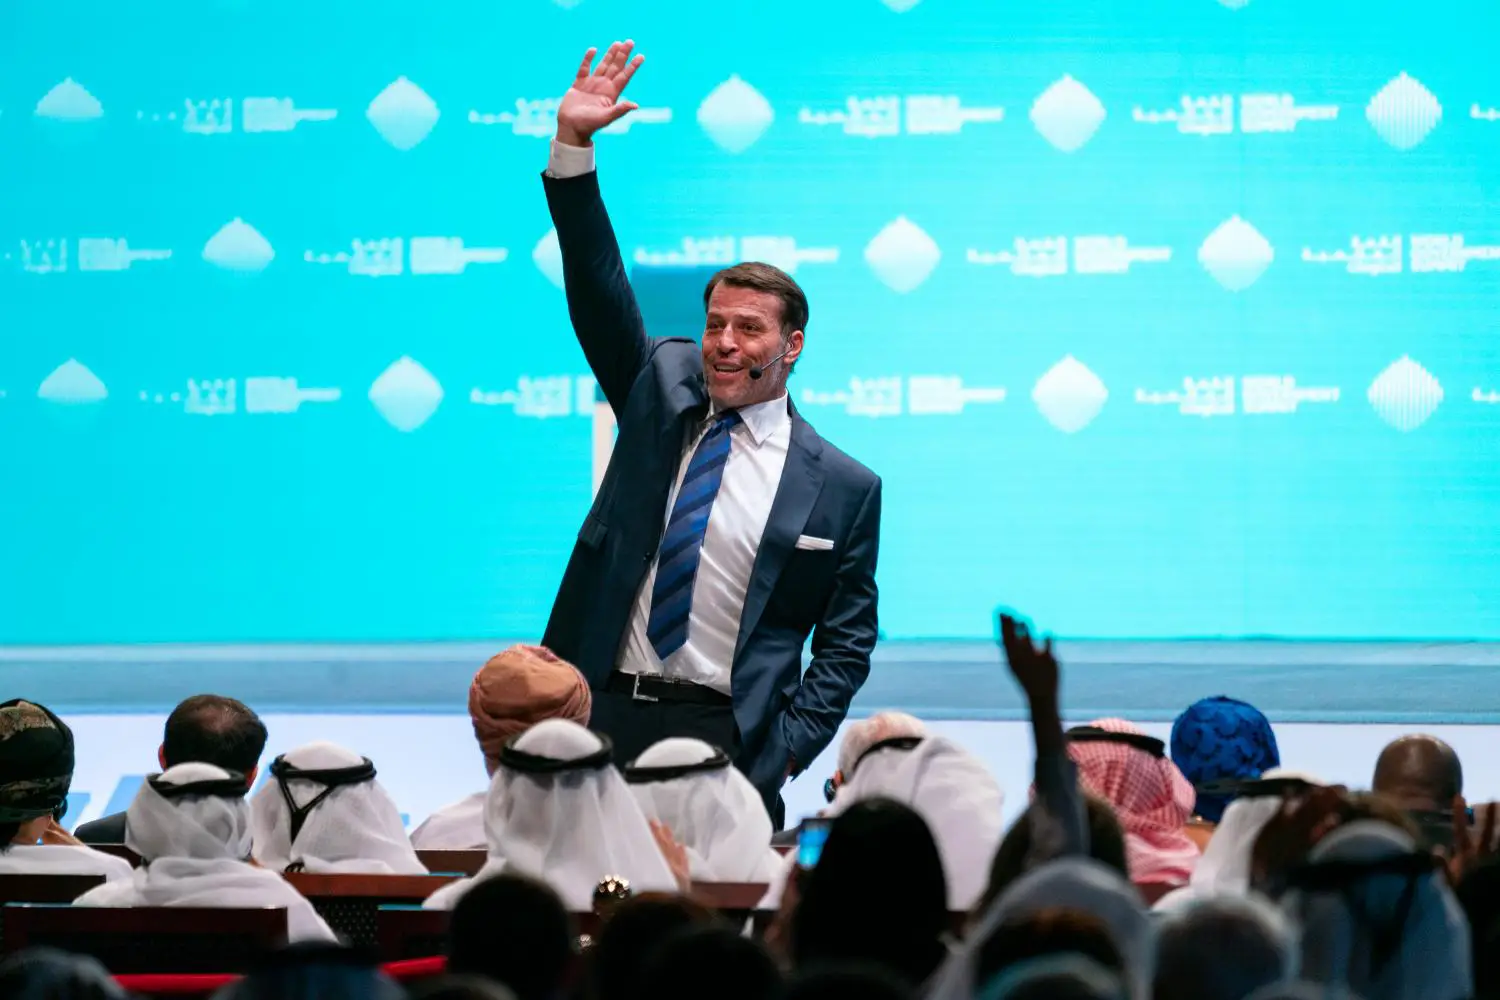 Entrepreneur, life coach and philanthropist Tony Robbins announces humanitarian project with UAE leadership to feed 1 billion people at World Government Summit in Dubai © AETOSWire